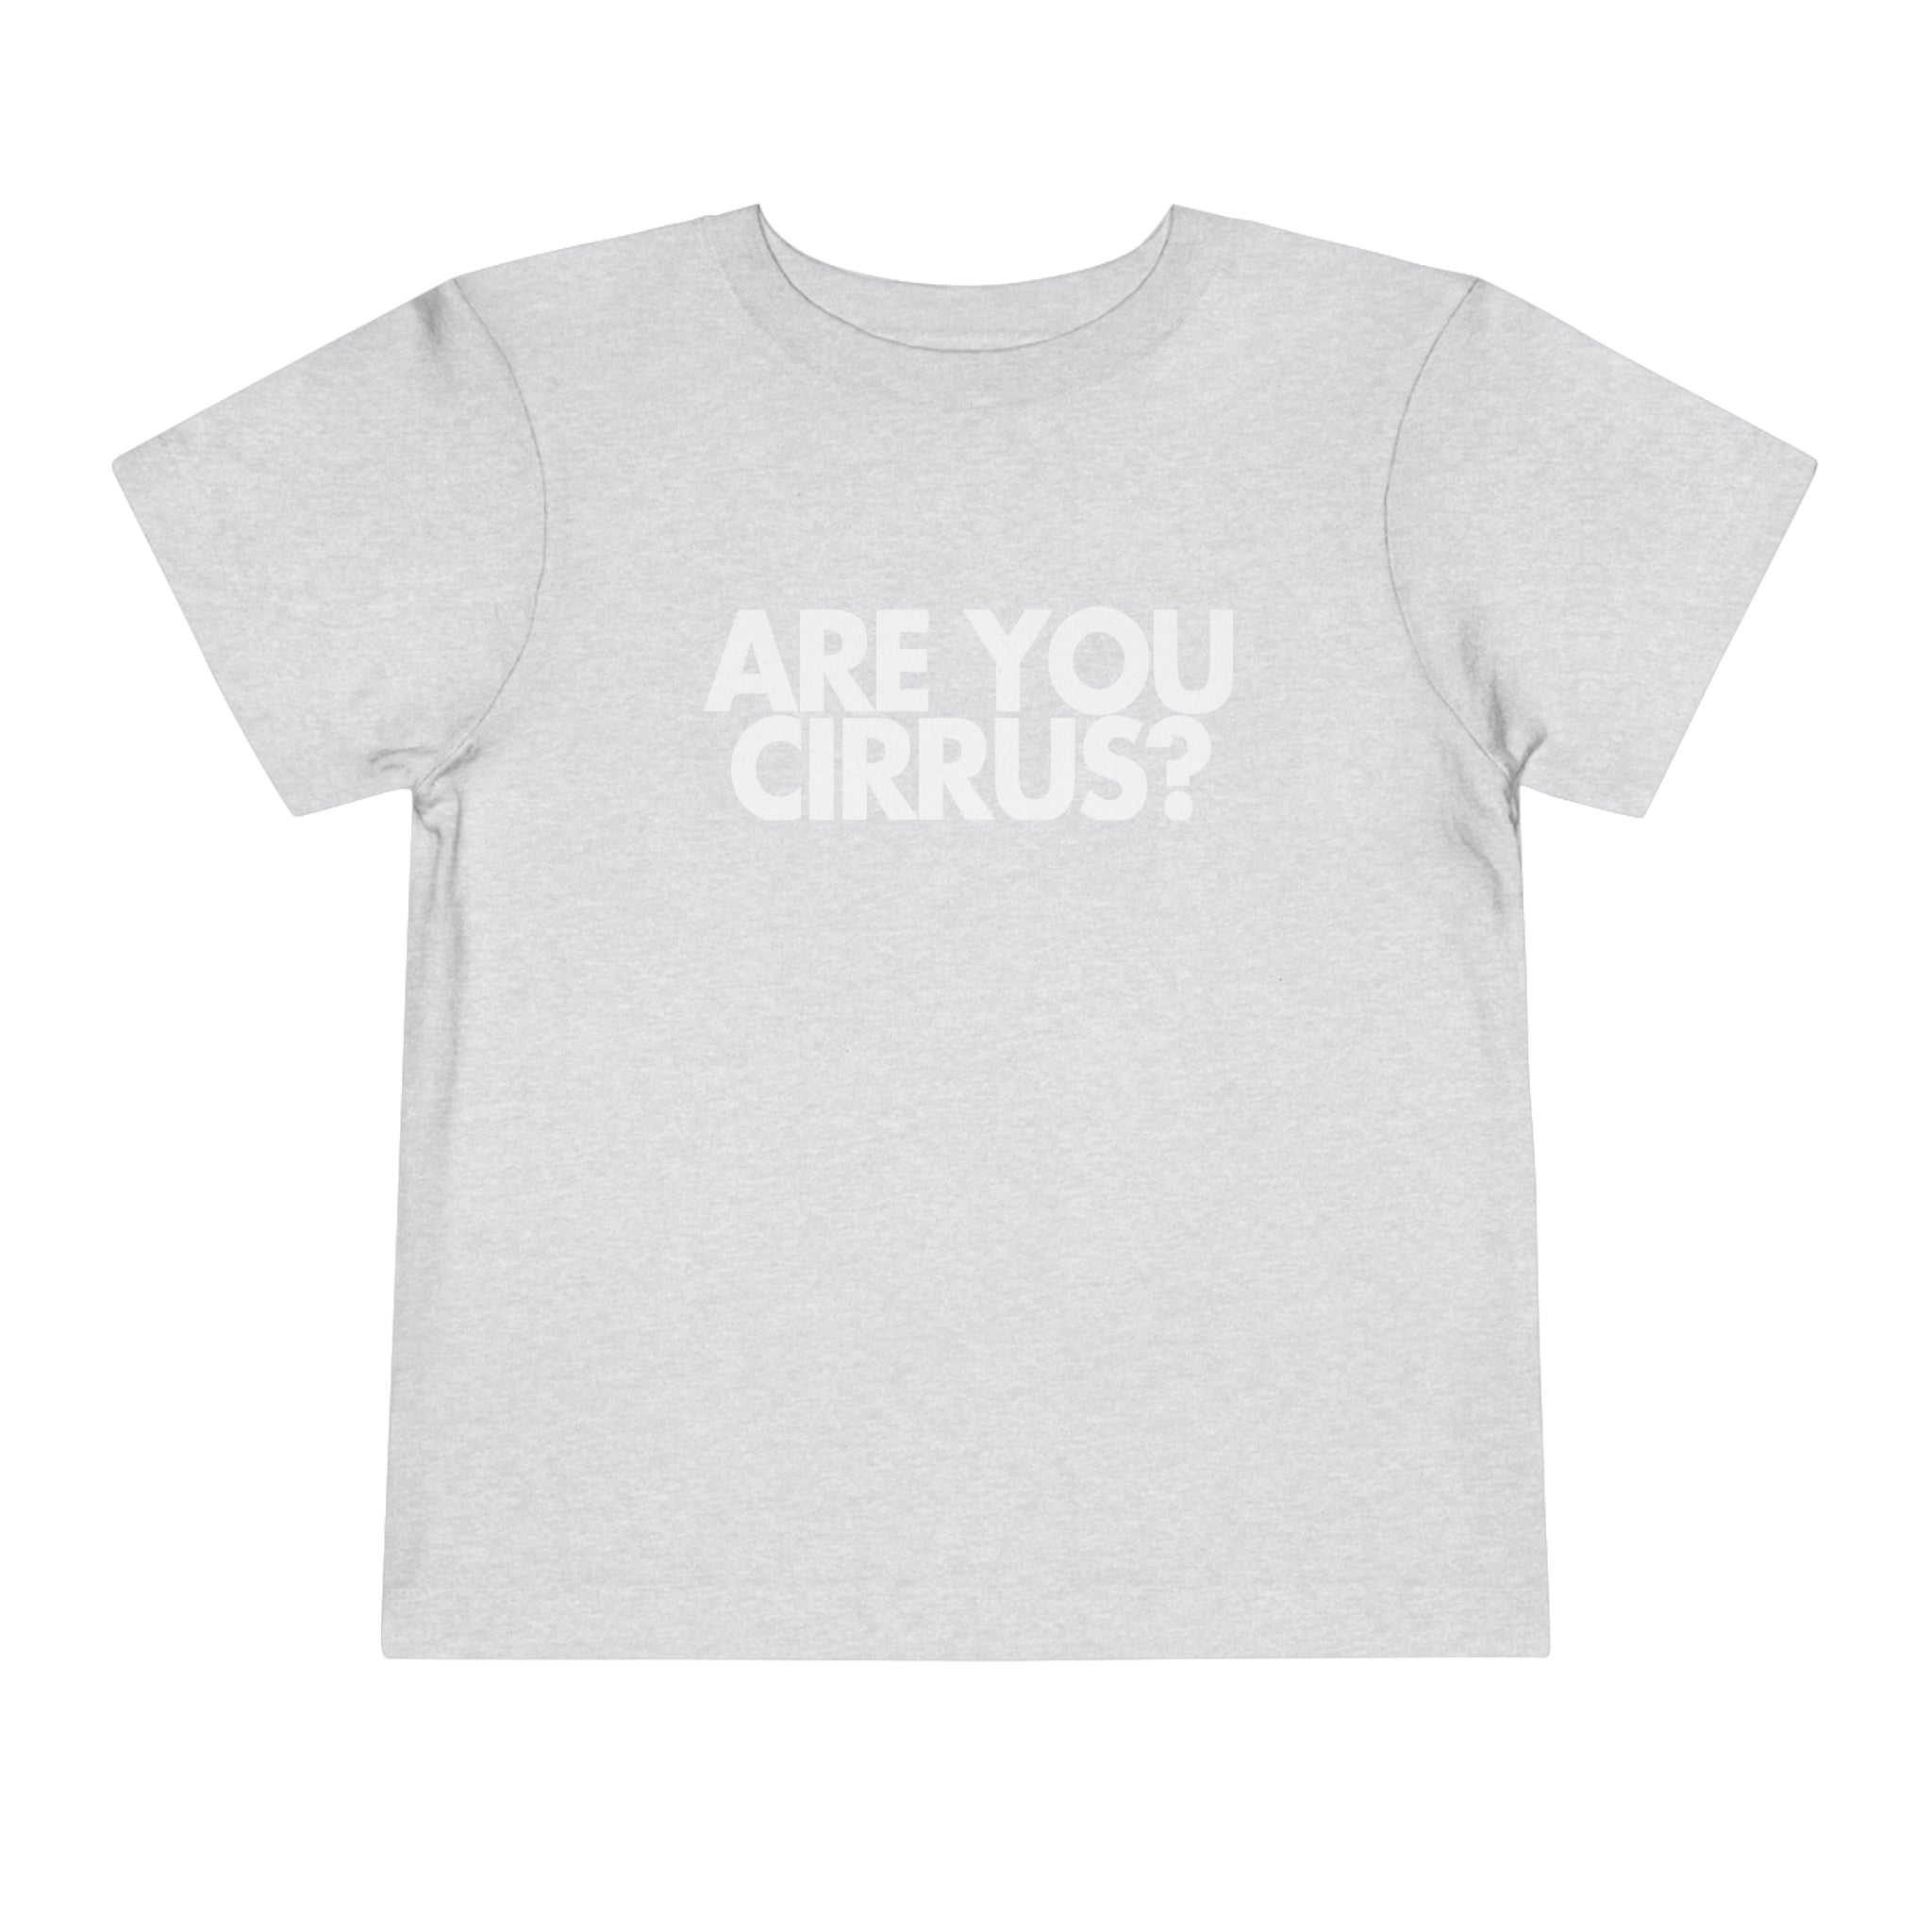 Are You Cirrus? Toddler Tee 